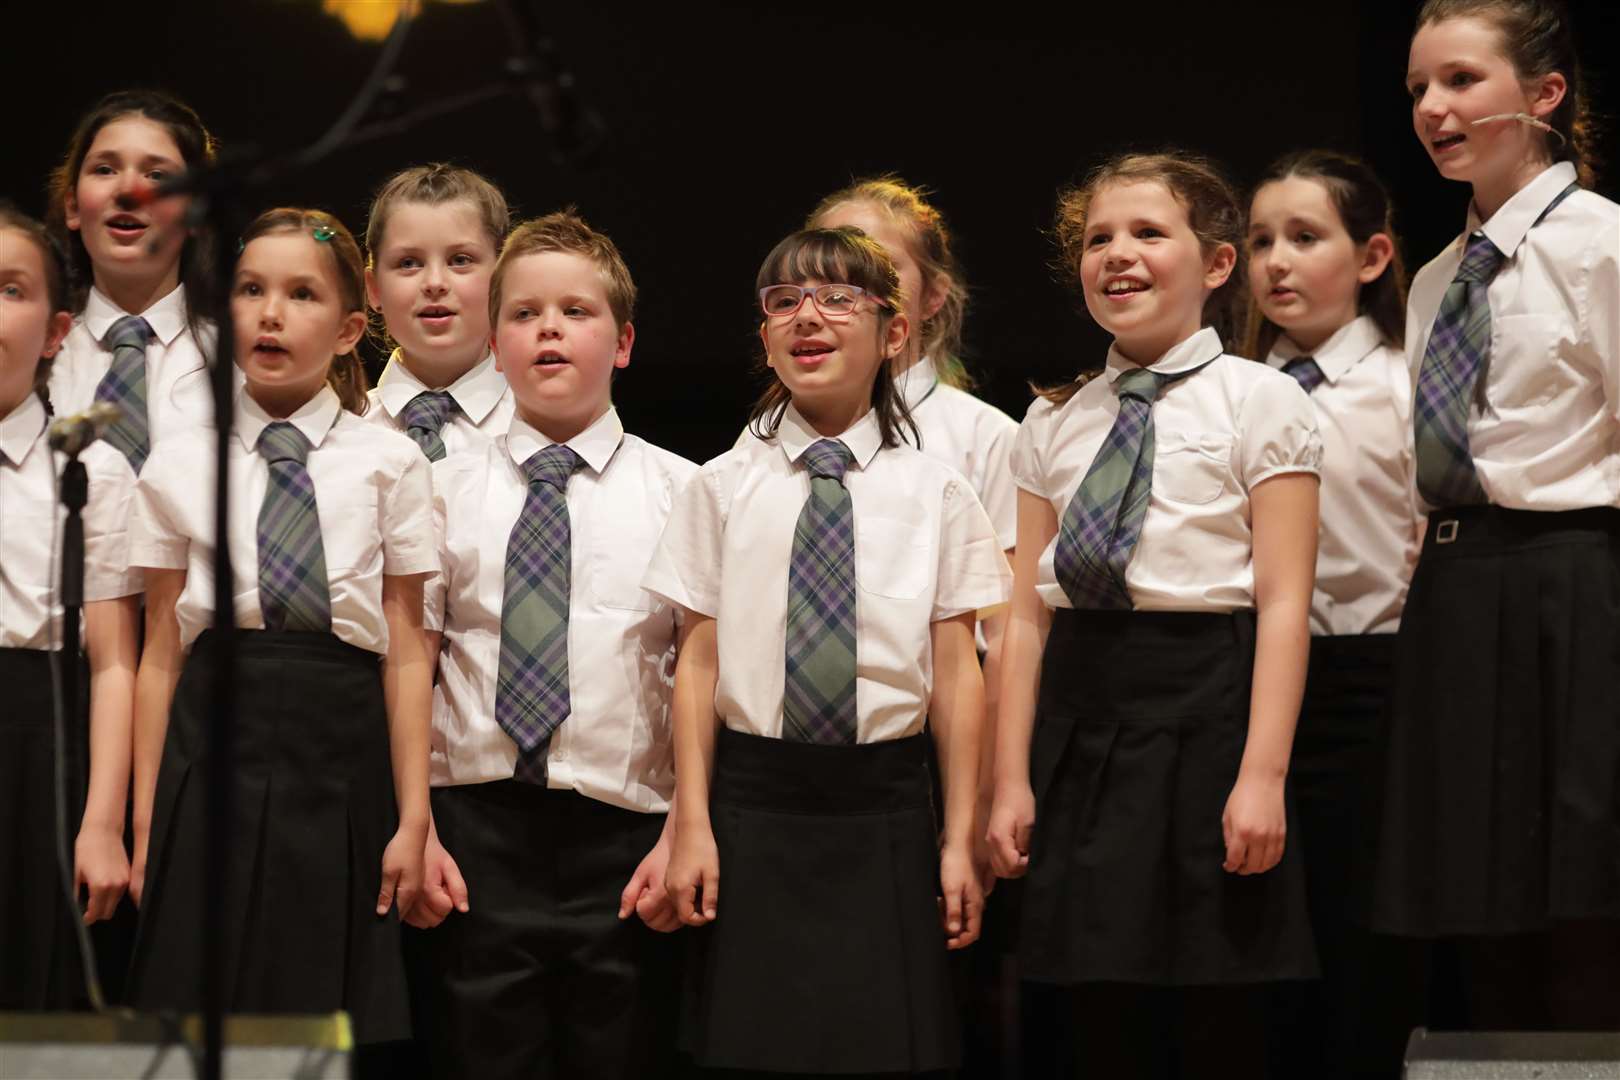 Picture shows Choir from Bun-sgoil Ghàidhlig Inbhir Nis, the Highland’s first designated purpose-built all Gaelic school. performing on stage at the special Our Language, Our Music concert will feature an all-star line-up of guest musicians. Notable fiddle player Duncan Chisholm, award-winning multi-instrumentalist Mairearad Green, Isle of Lewis piper and flautist James Duncan Mackenzie and the amazing Cànan’s Ar Cèol House Band will get toes tapping at the Empire Theatre, Eden Court at 7.30pm. There will also be a host of up and coming musical talent as young Gaelic musicians will take to the sfor the first time.